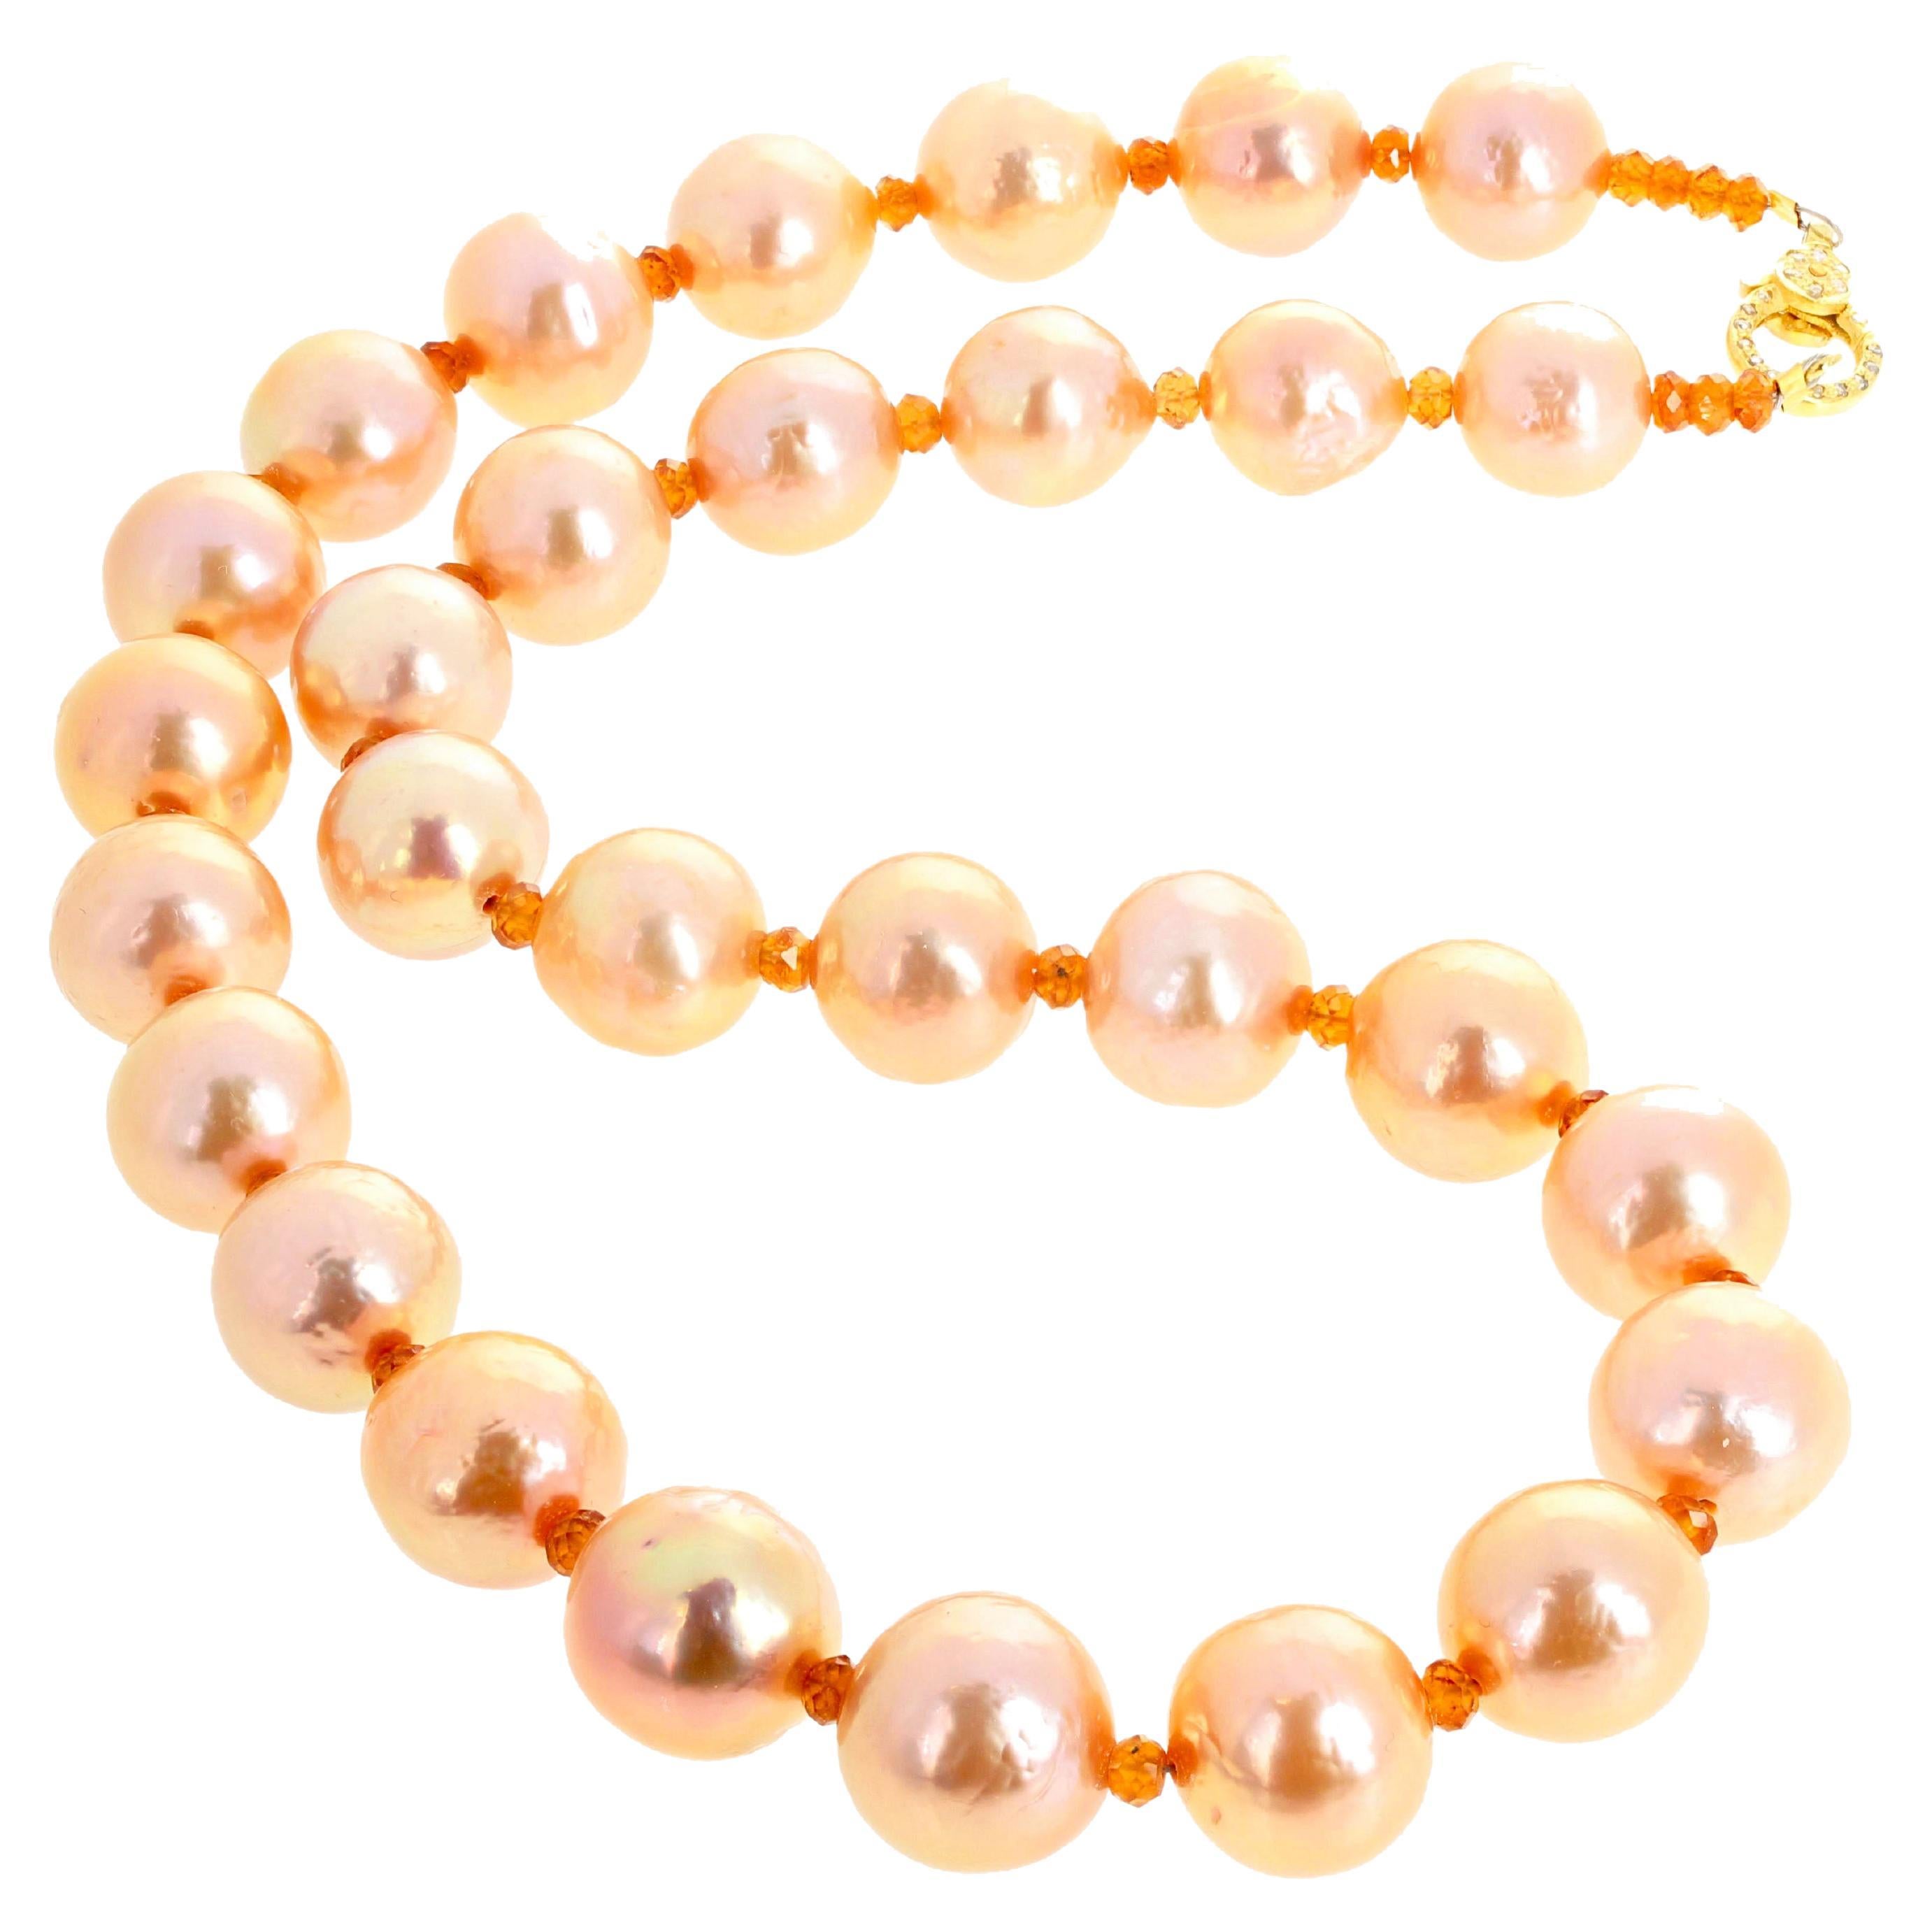 AJD RARE Peachy Glowing Ocean NATURAL Pearls Necklace & Matching Earrings Set